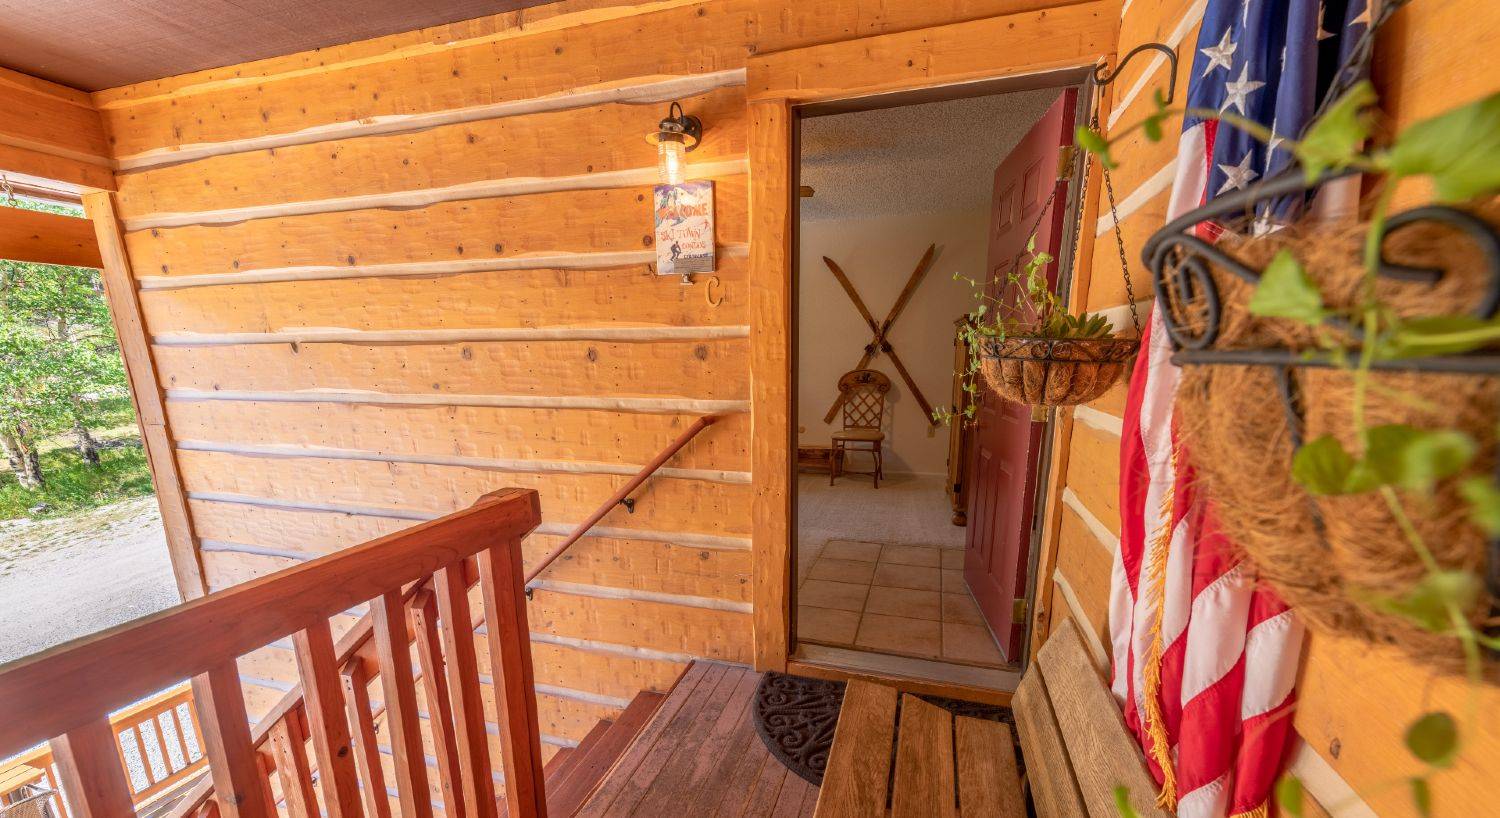 Entrance to condo C, hanging plants on the log siding, American flag standing in a holder, stairs leading down on the left, door open to the living room with antique skis on the wall.